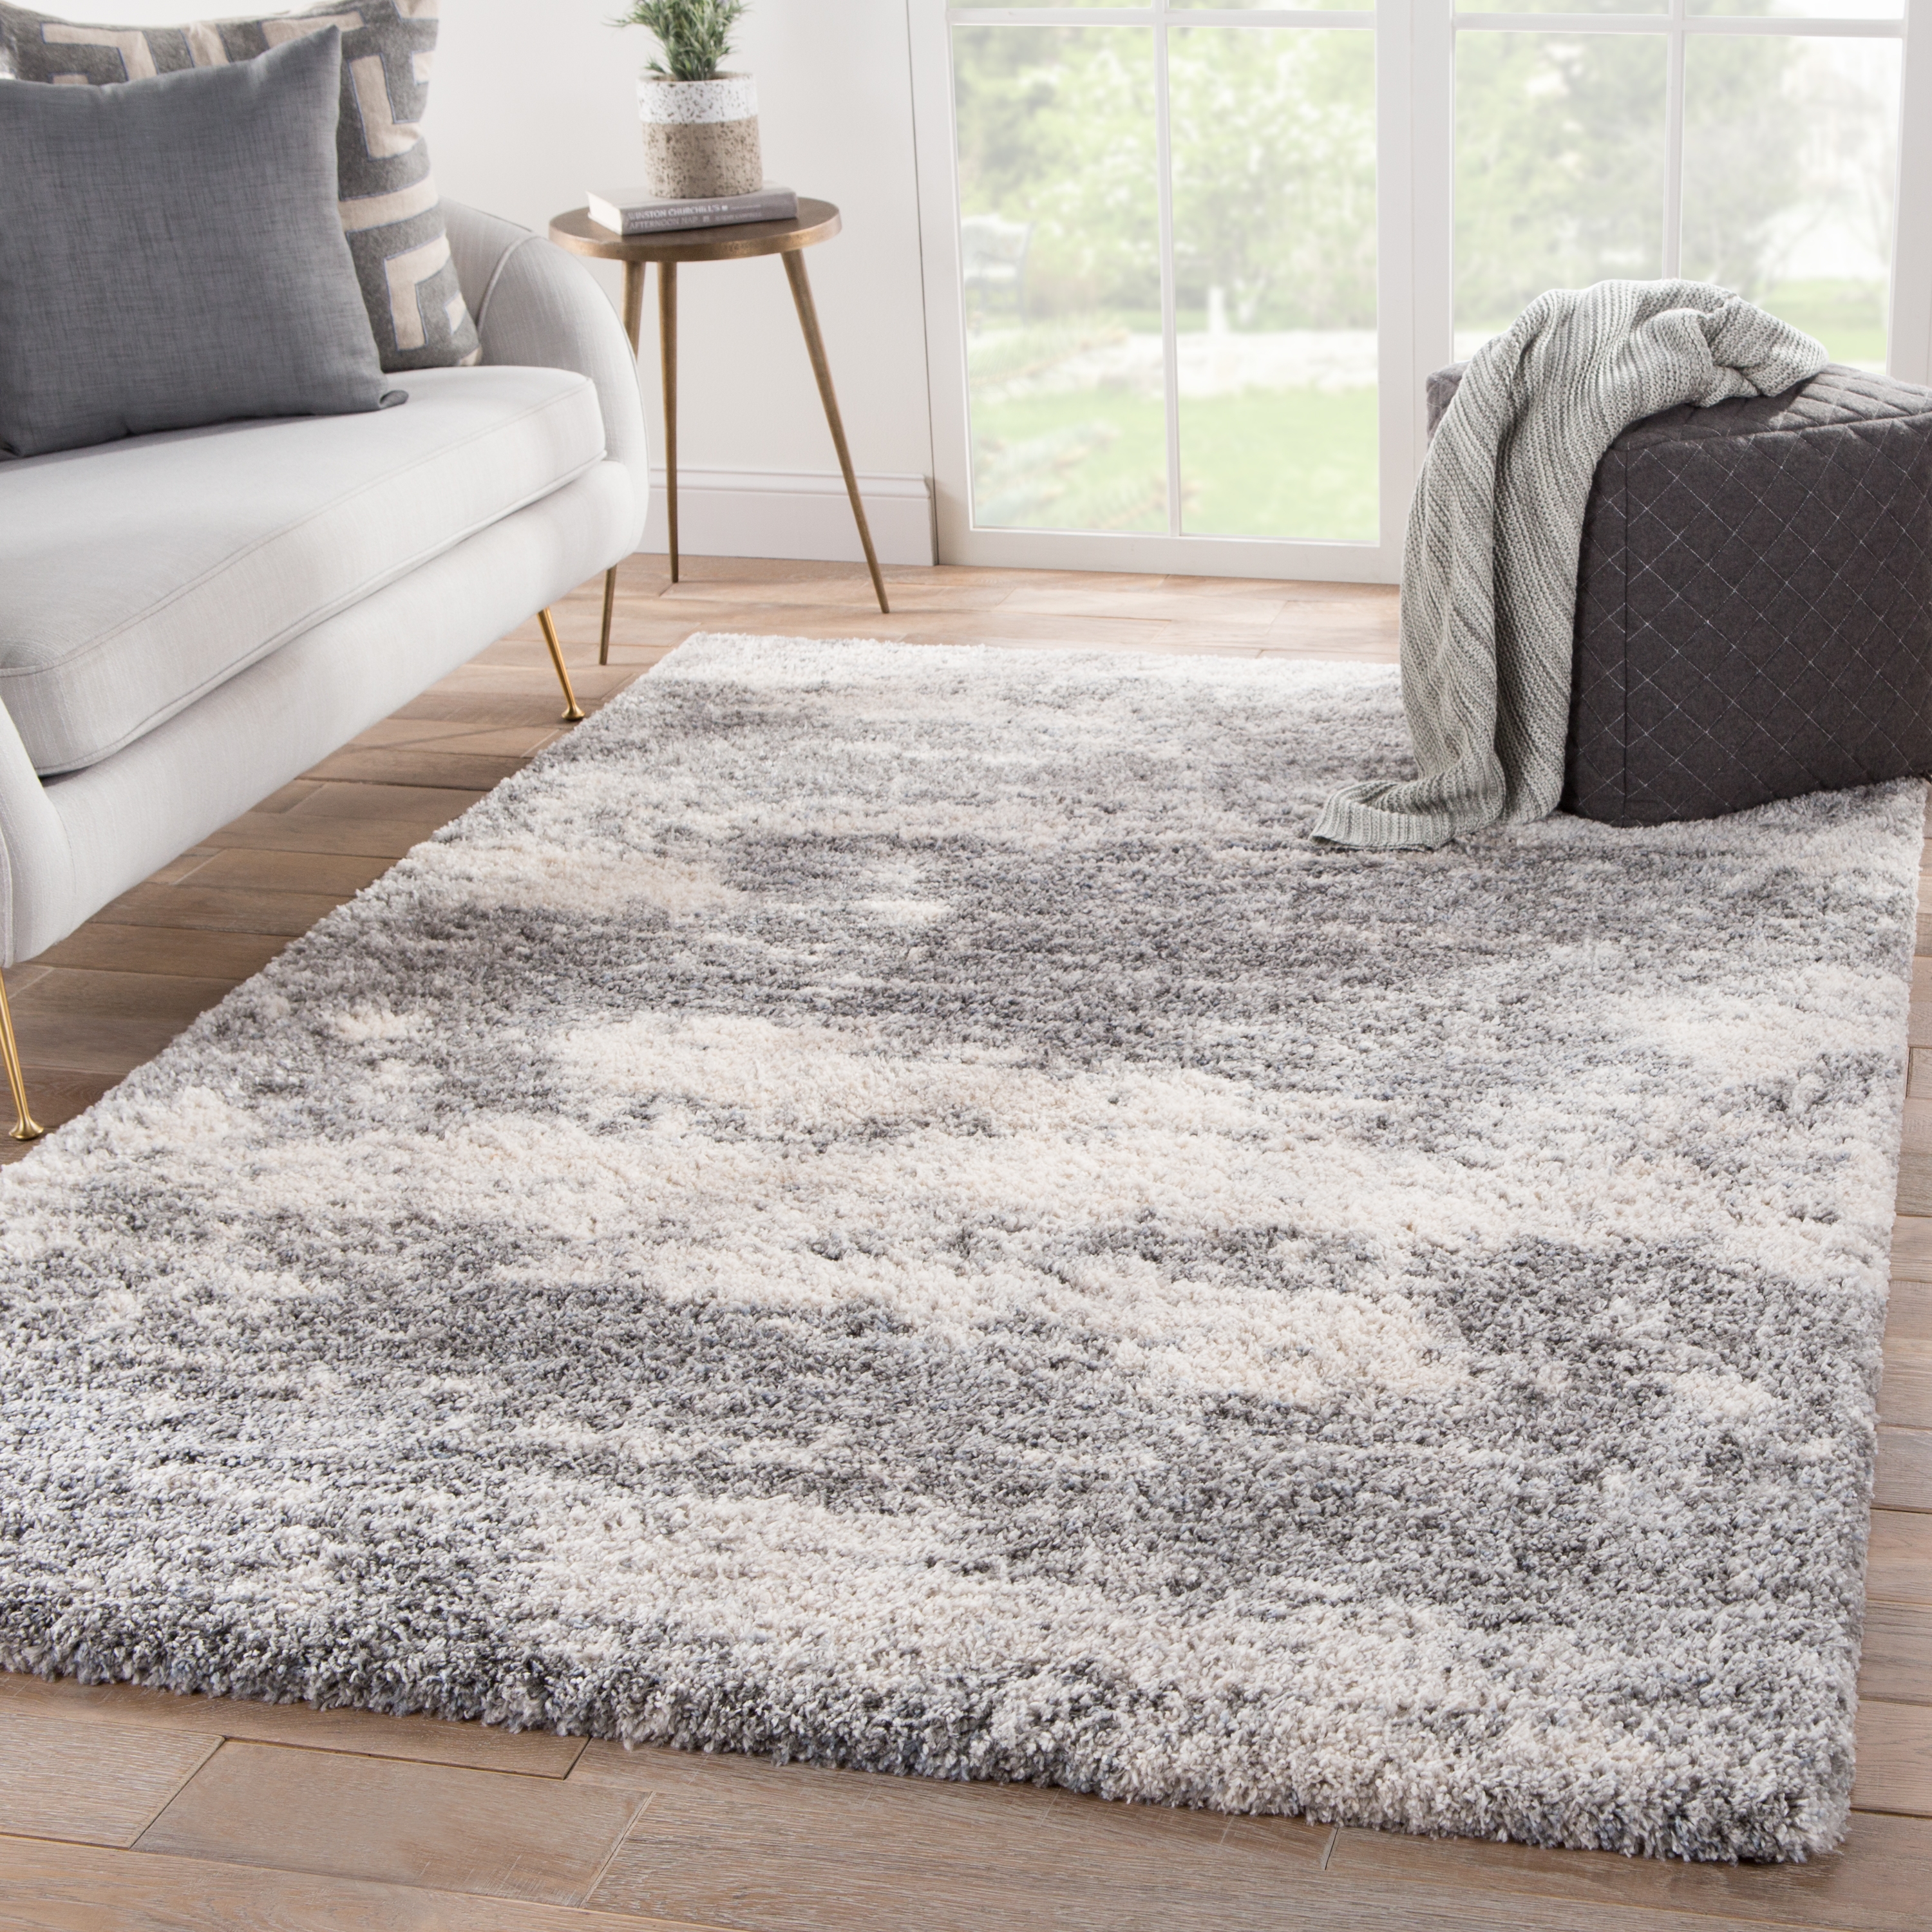 Elodie Abstract Gray/ Ivory Runner Rug (2'6"X8') - Image 4